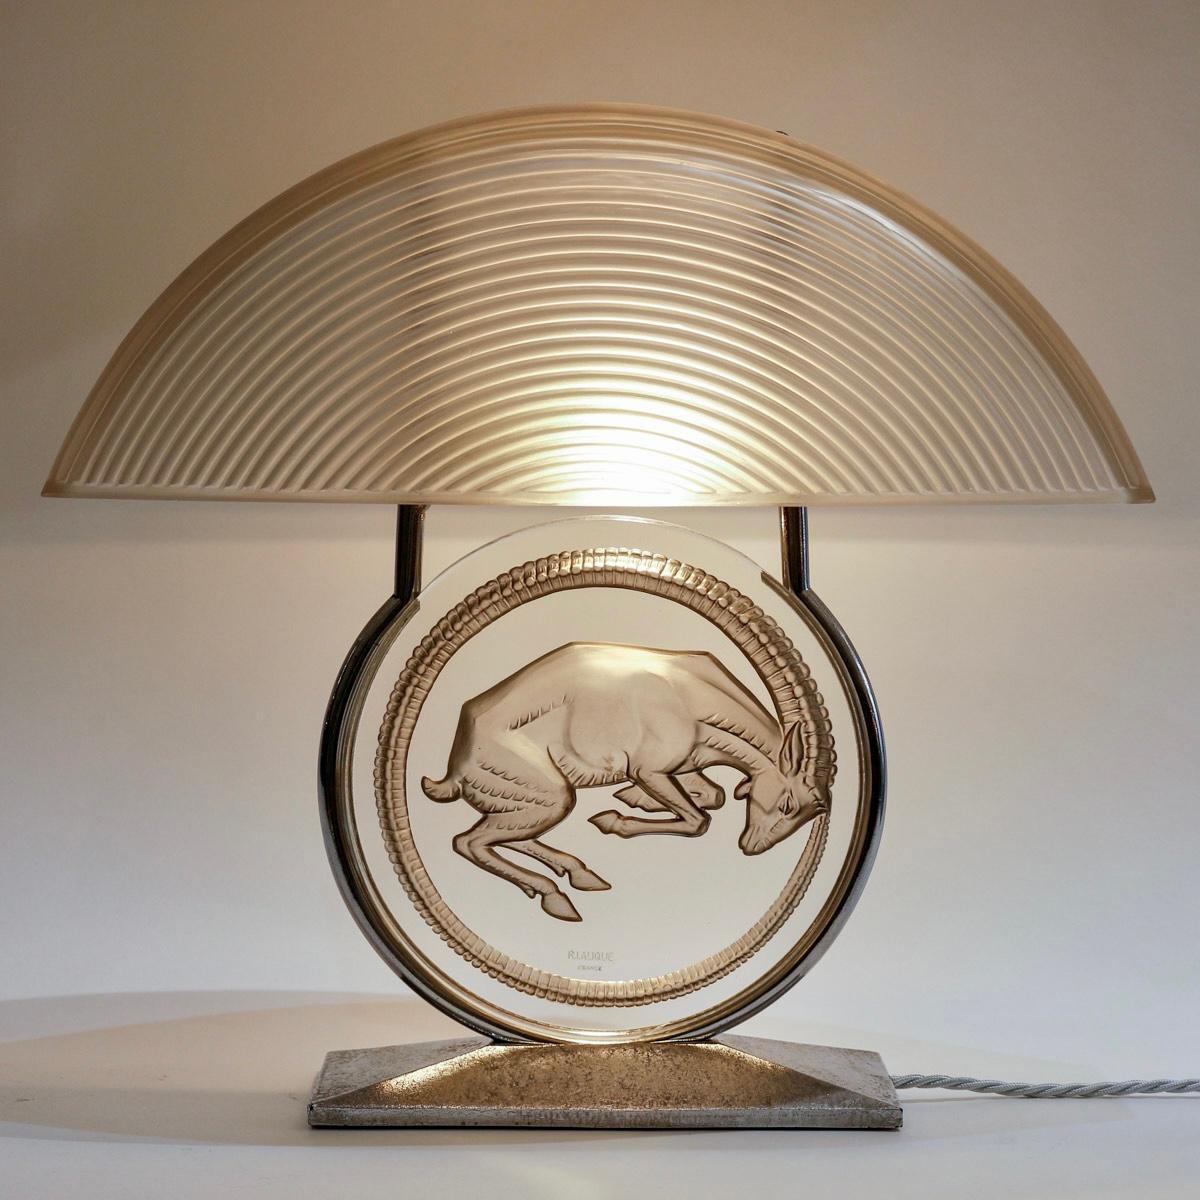 1931 René Lalique Pair Lamps Belier Rams Glass with Grey Patina In Good Condition For Sale In Boulogne Billancourt, FR